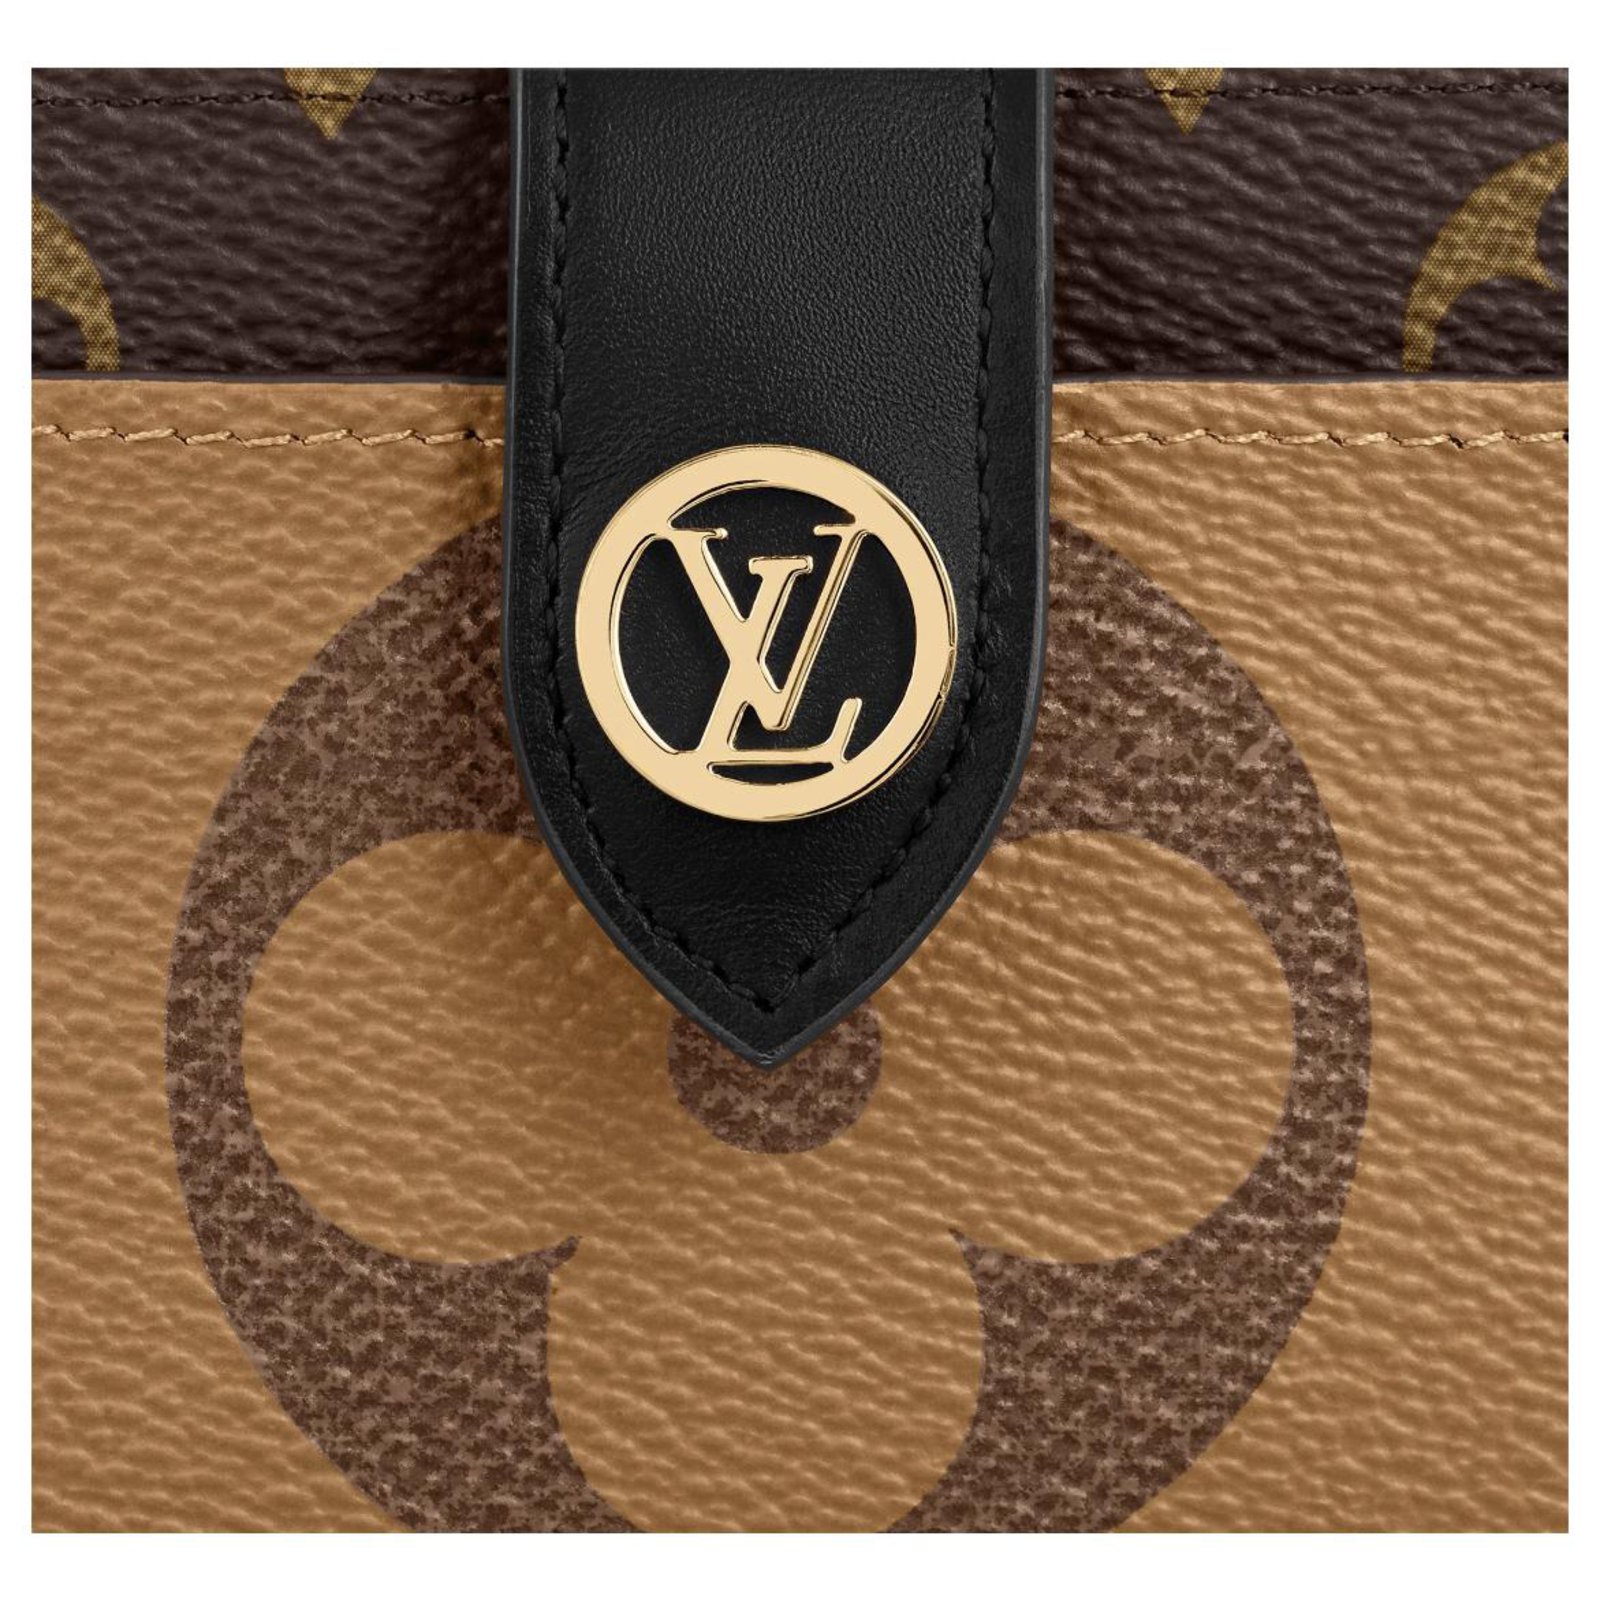 Louis Vuitton Recto Card Holder vs Juliette Wallet-WHICH ONE IS BETTER? 